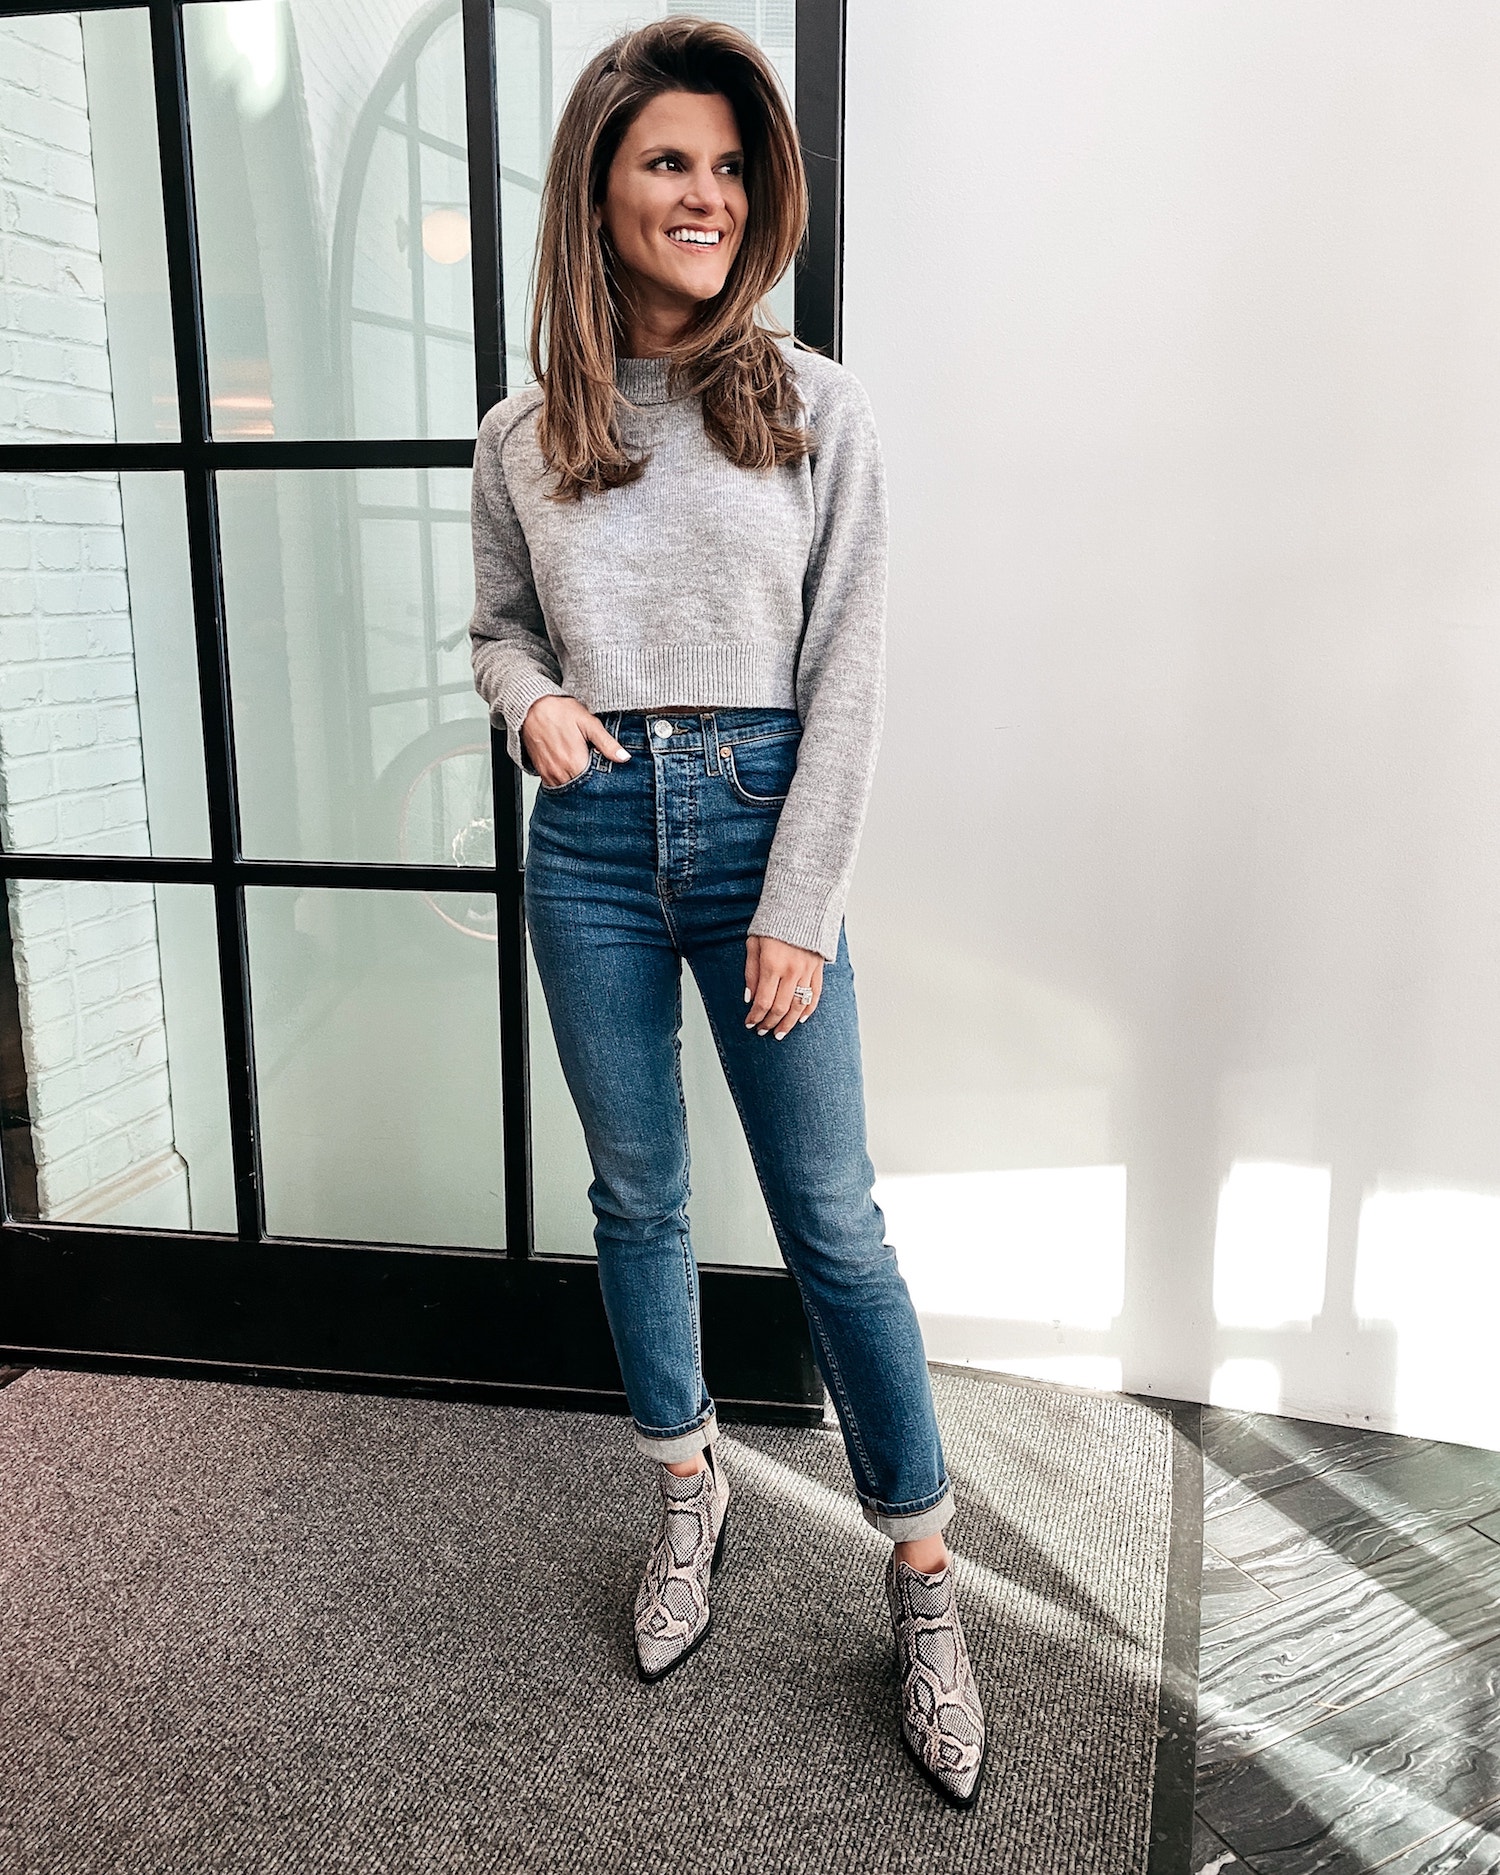 Brighton Keller wearing a cropped grey sweater, jeans and printed booties